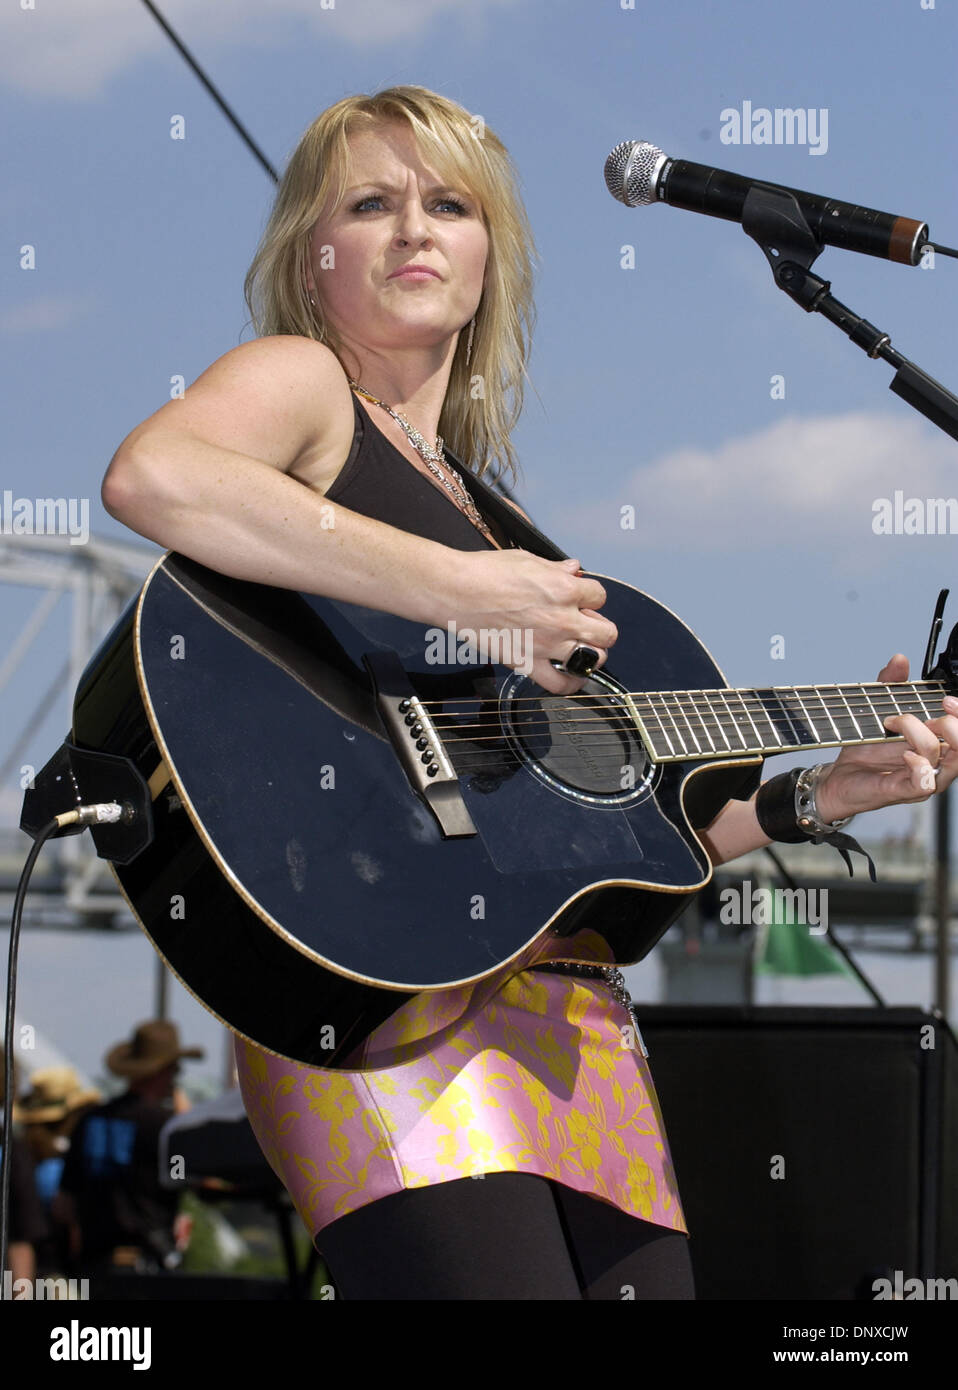 Jun 09, 2006 - Nashville, TN, USA - Musician CAROLYN DAWN JOHNSON performs live at the Riverfront Stage as part of the 2006 CMA Music Festival that took place in downtown Nashville. (Credit Image: © Jason Moore/ZUMA Press) Stock Photo